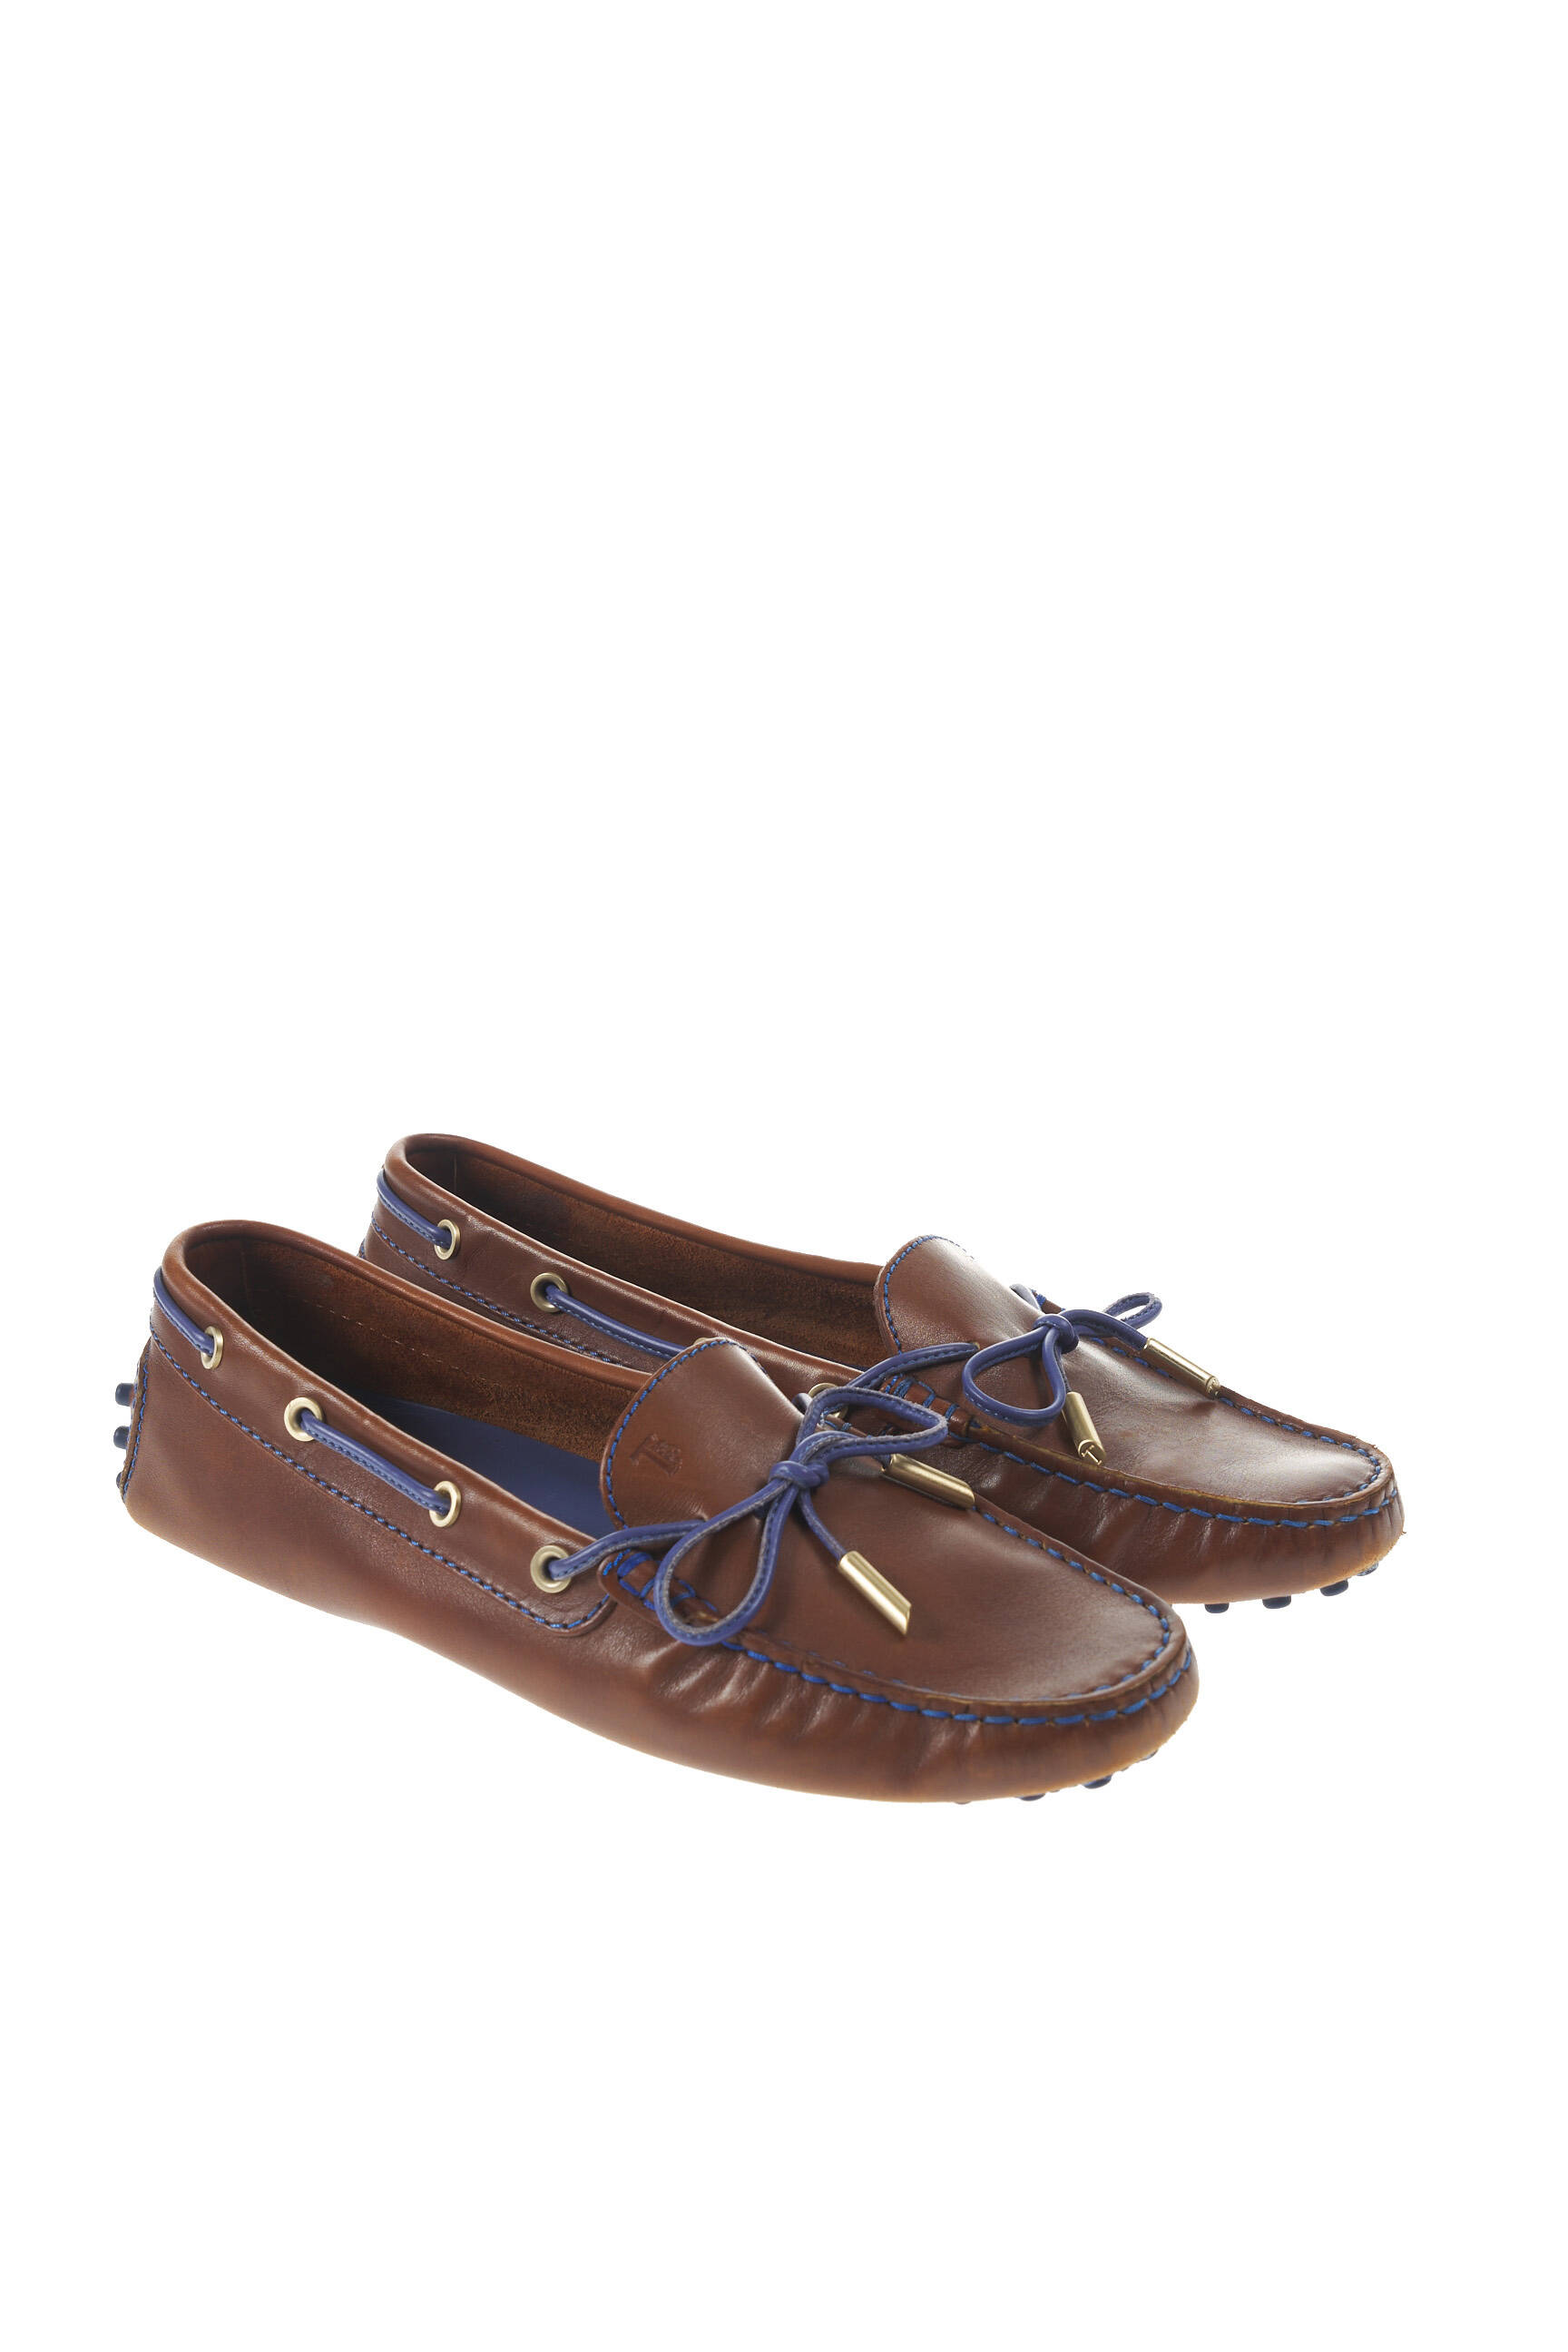 Femme Chaussures Tods Femme Ballerines Tods Femme Ballerines TODS 36 marron Ballerines Tods Femme 